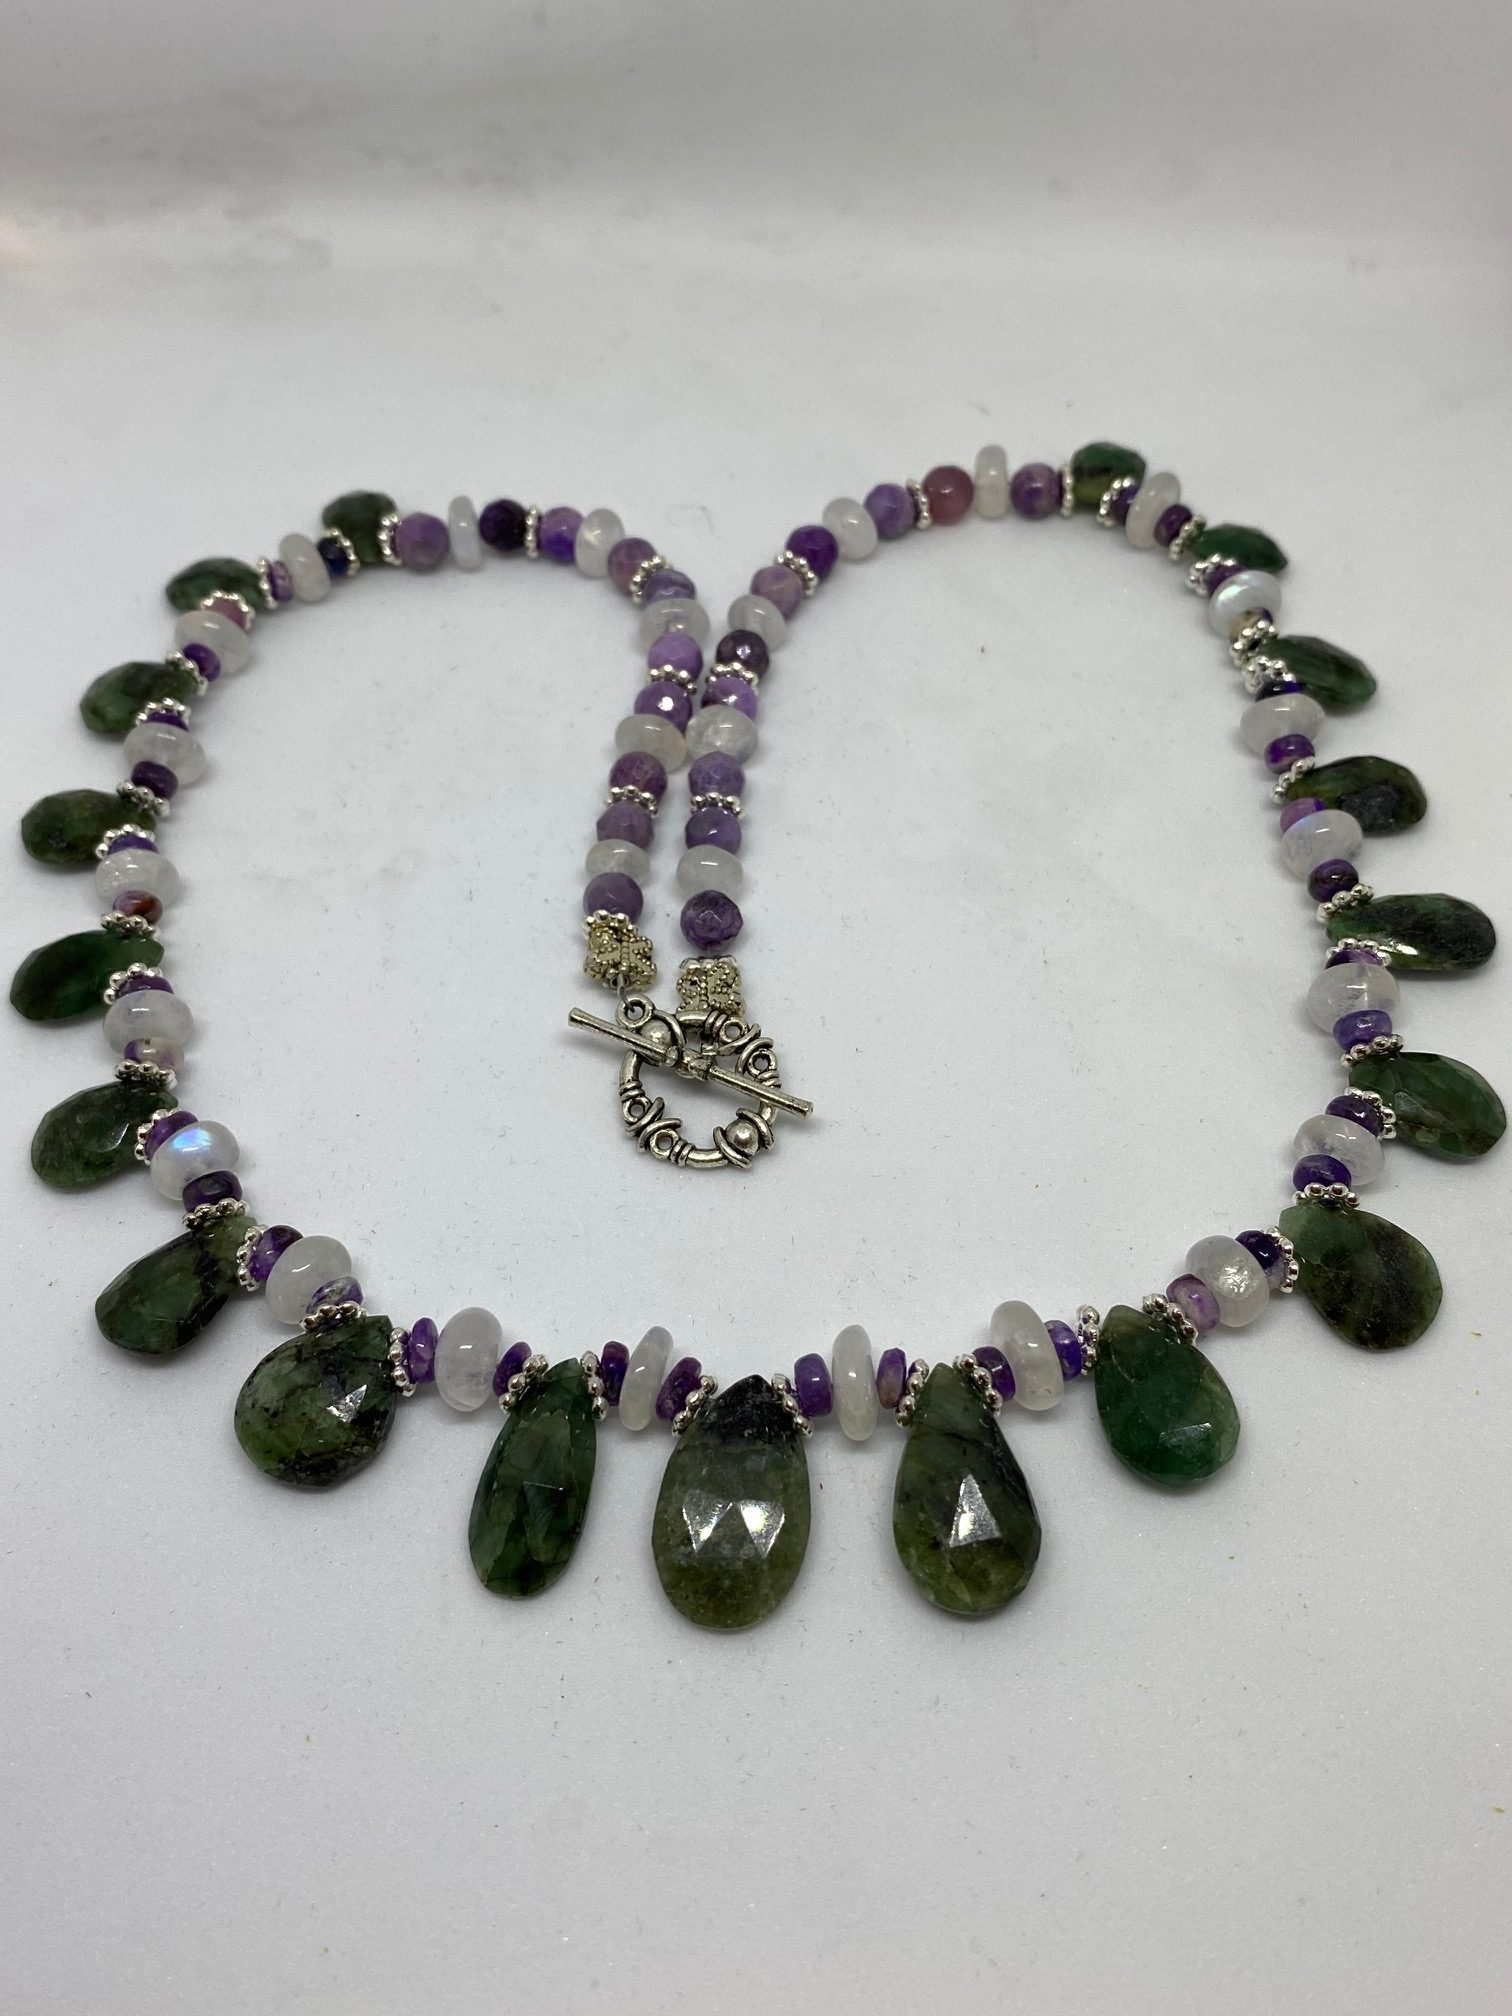 Emerald, Moonstone, and Sugilite Necklace This necklace supports Success, Good Fortune, and Your Inner Light.